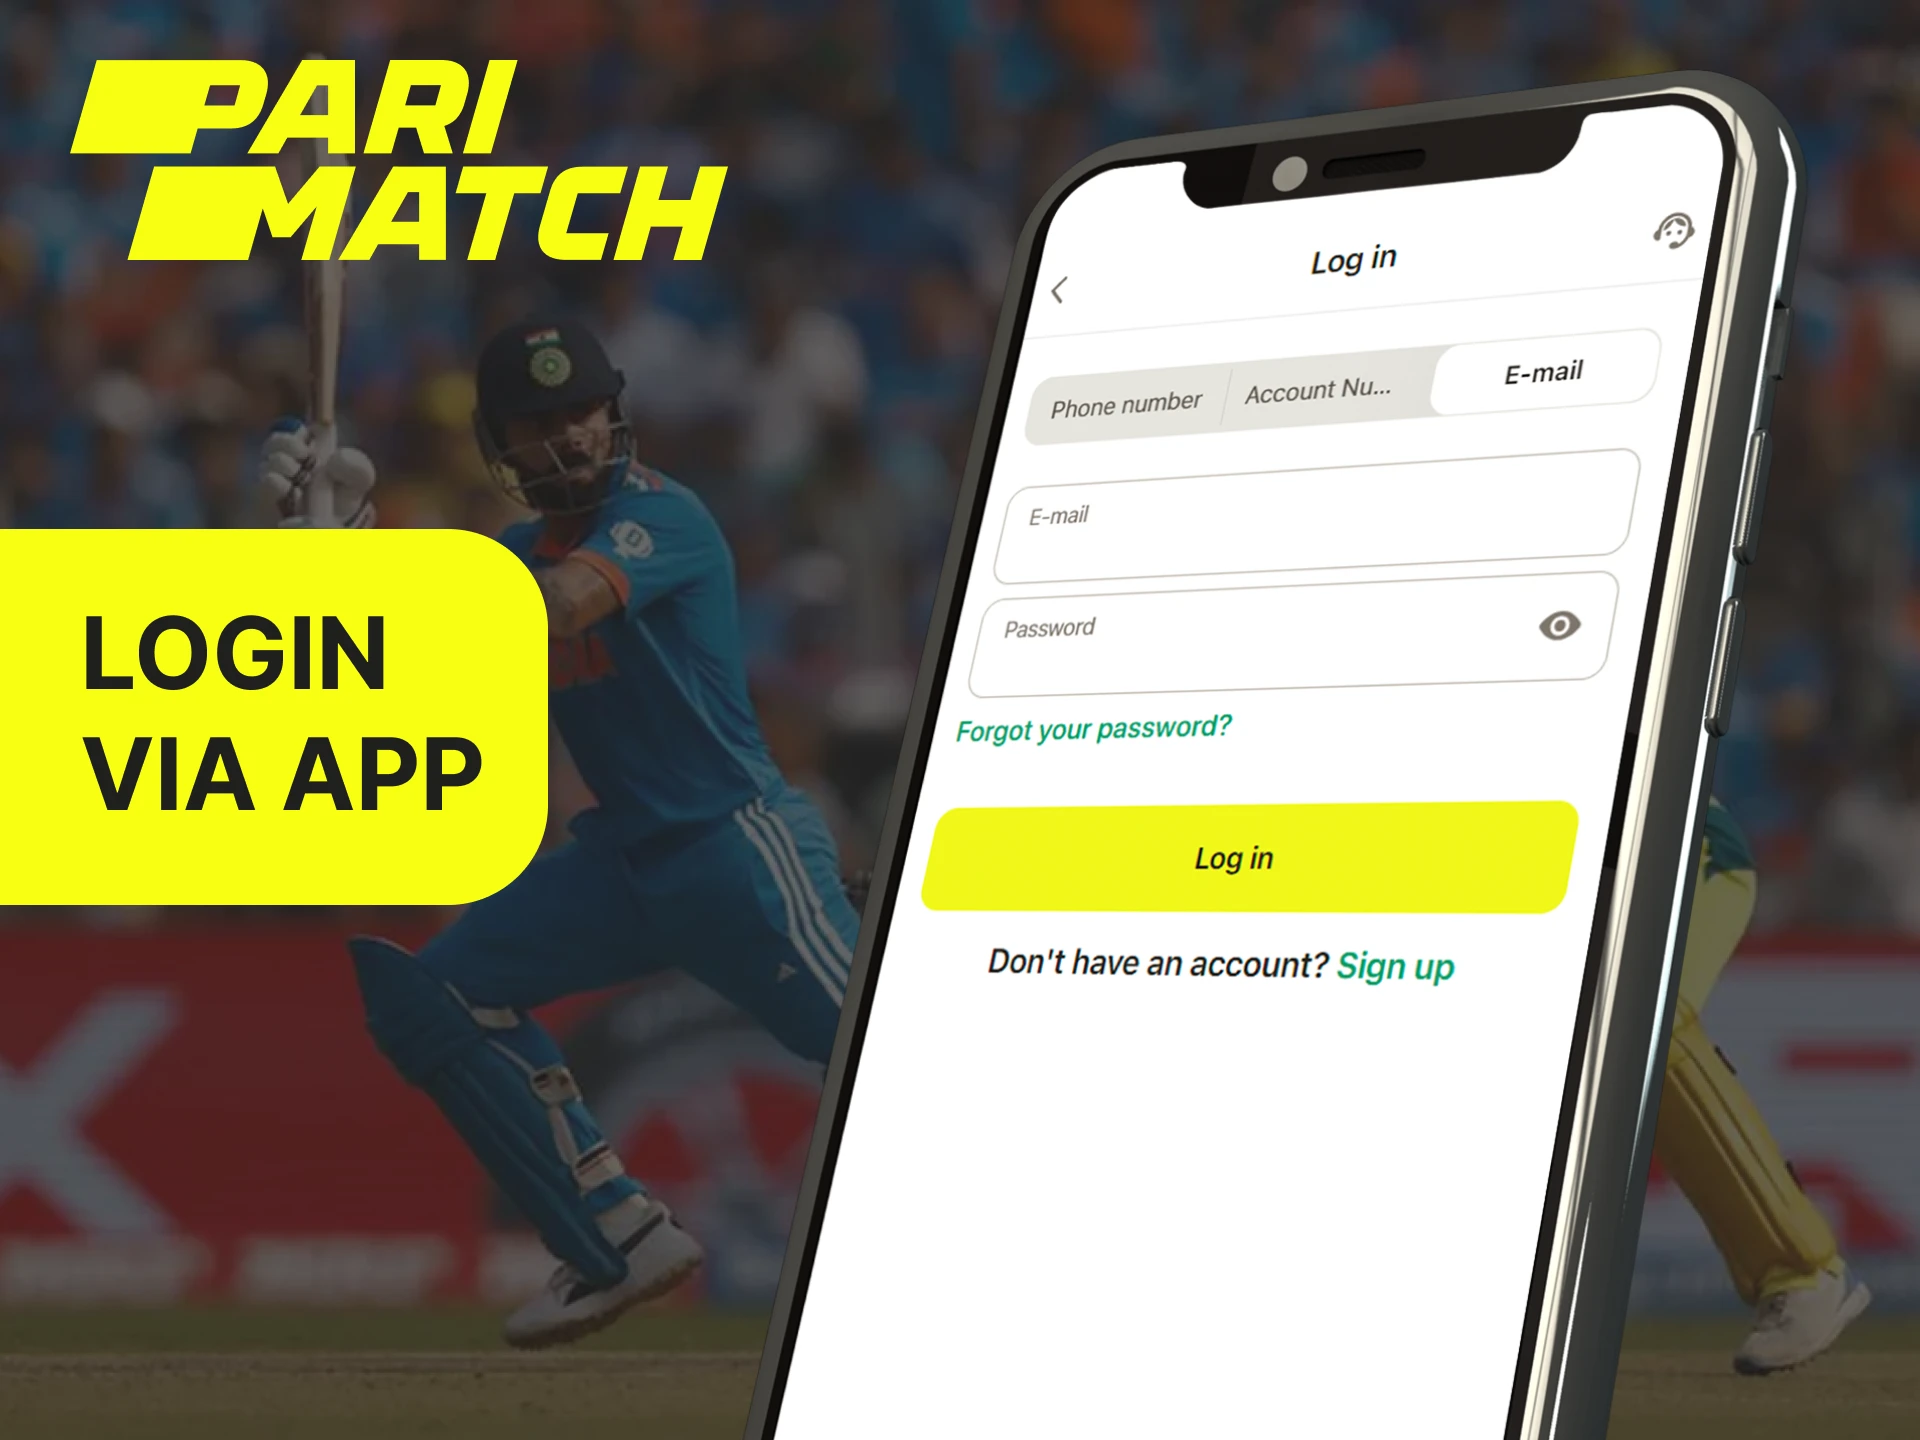 In the Parimatch mobile app, you do not need to create an account again, just log in.